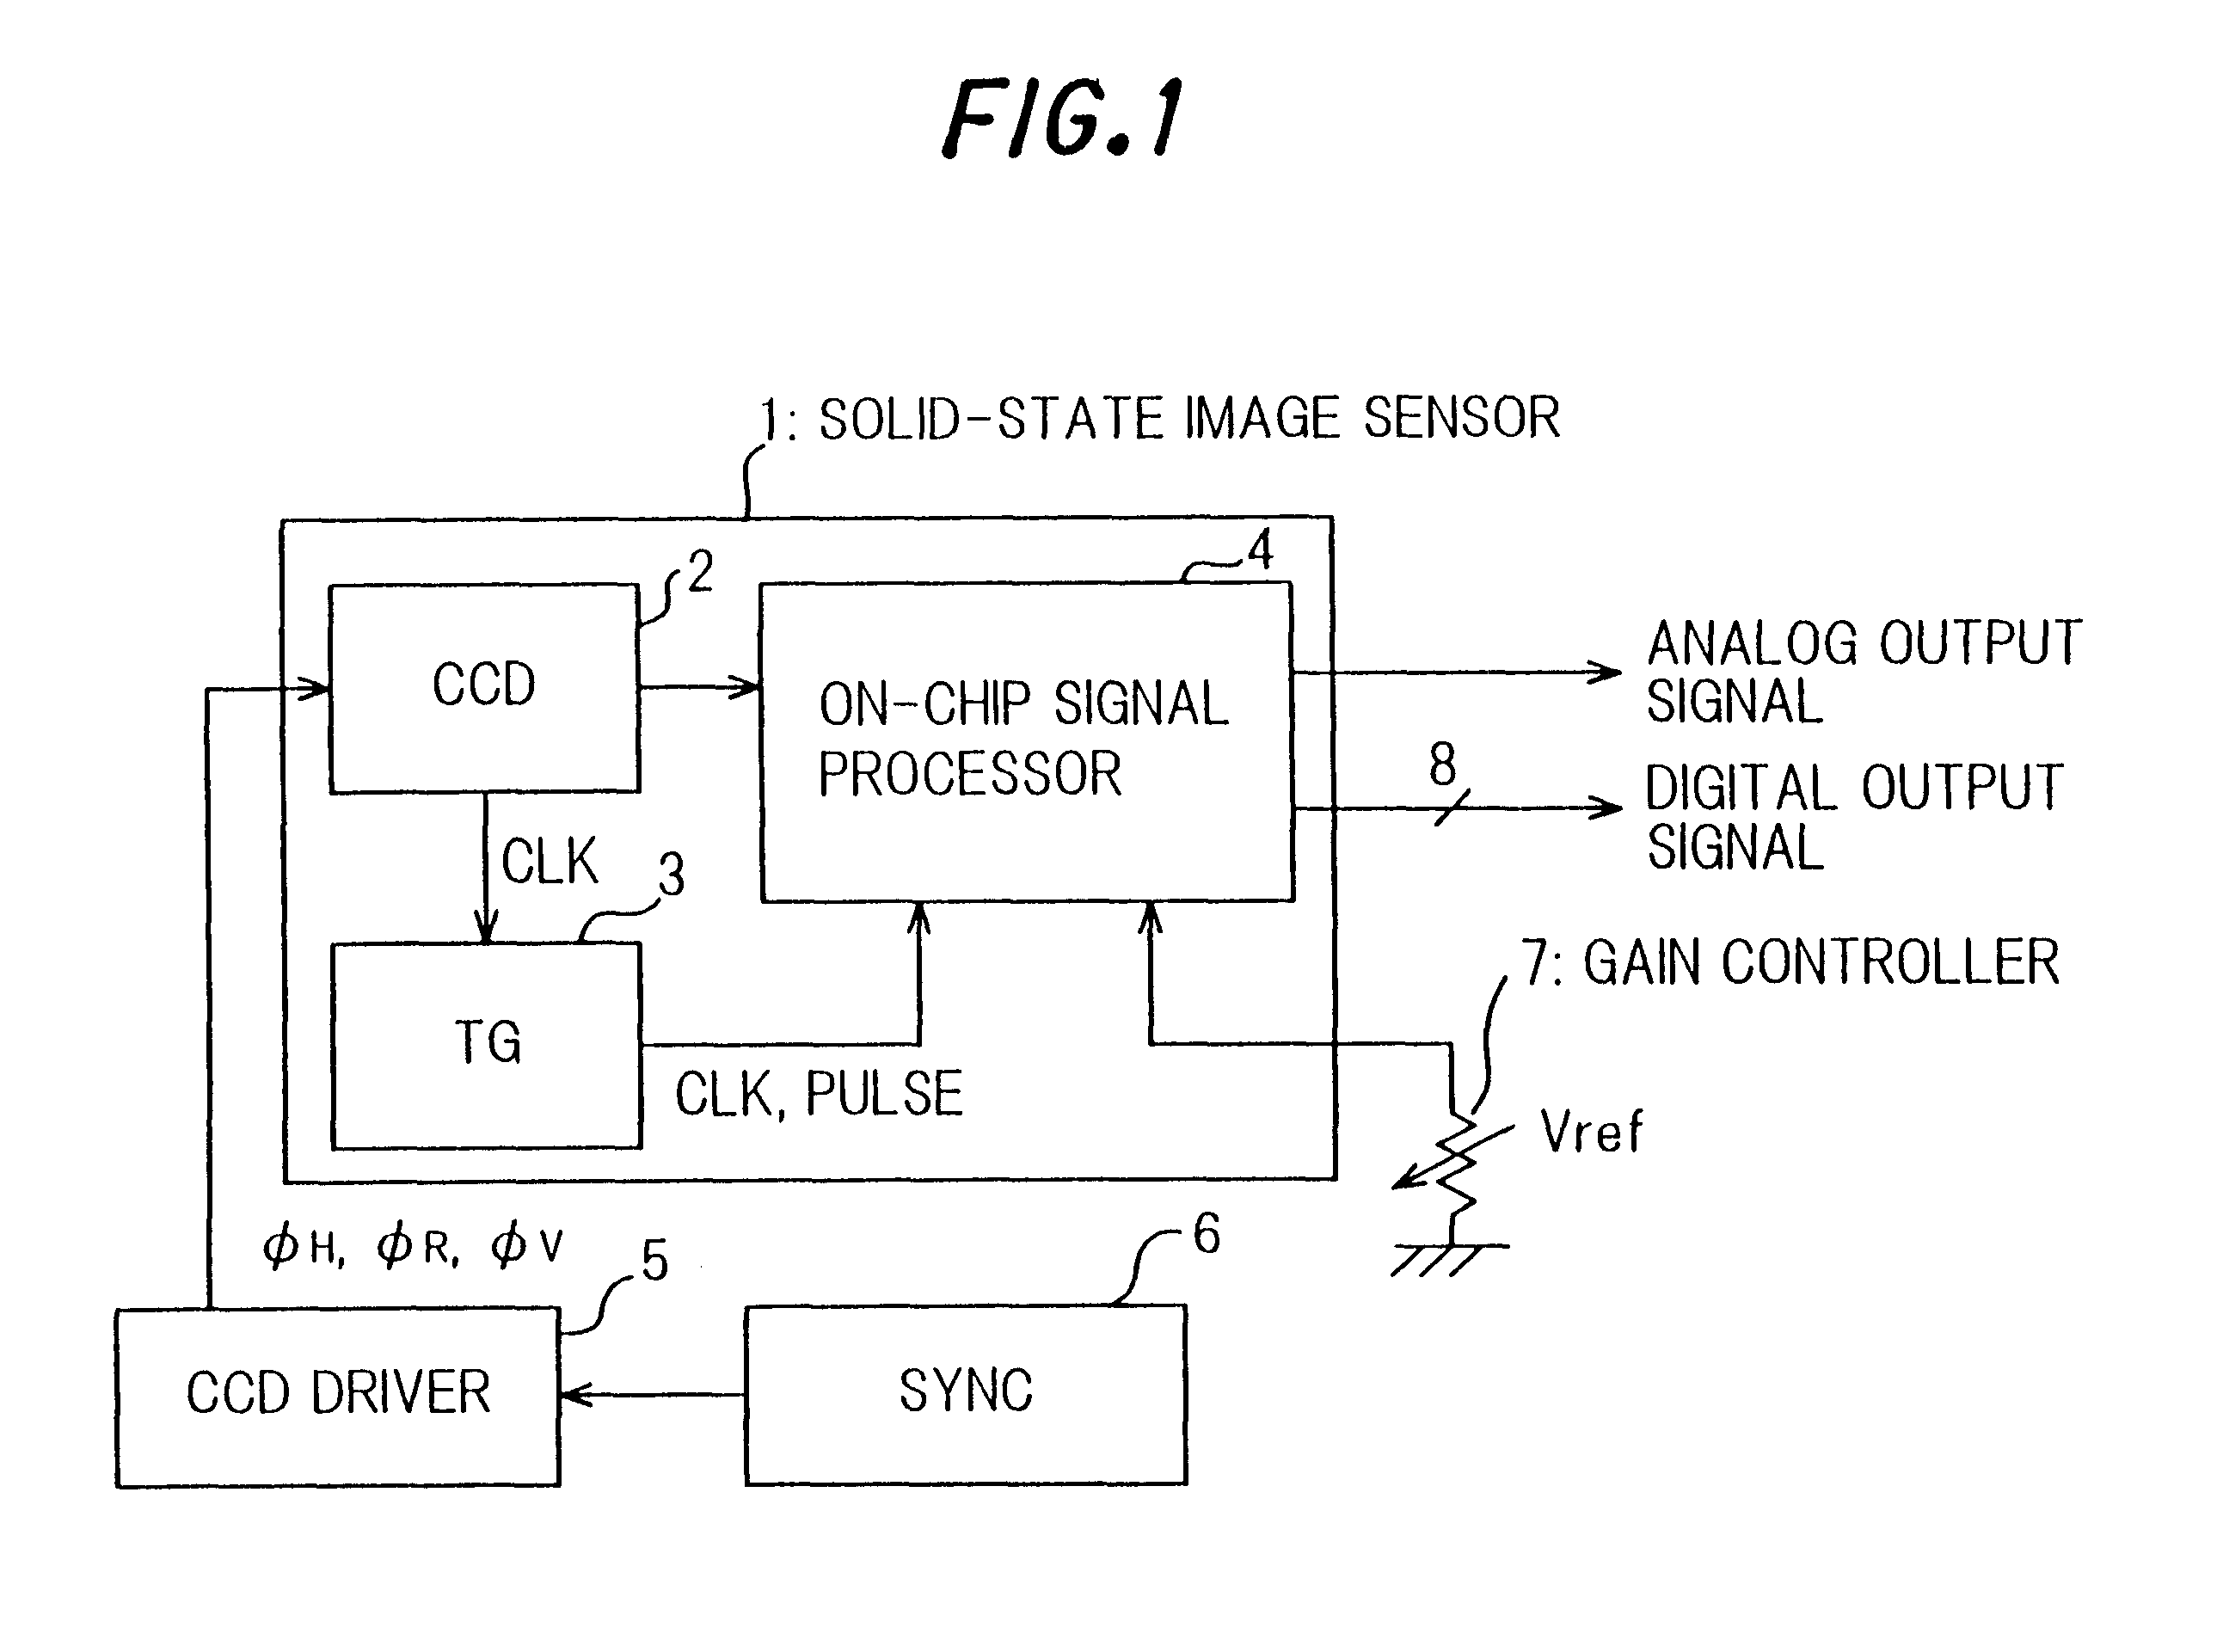 Solid-state camera including a charge coupled device